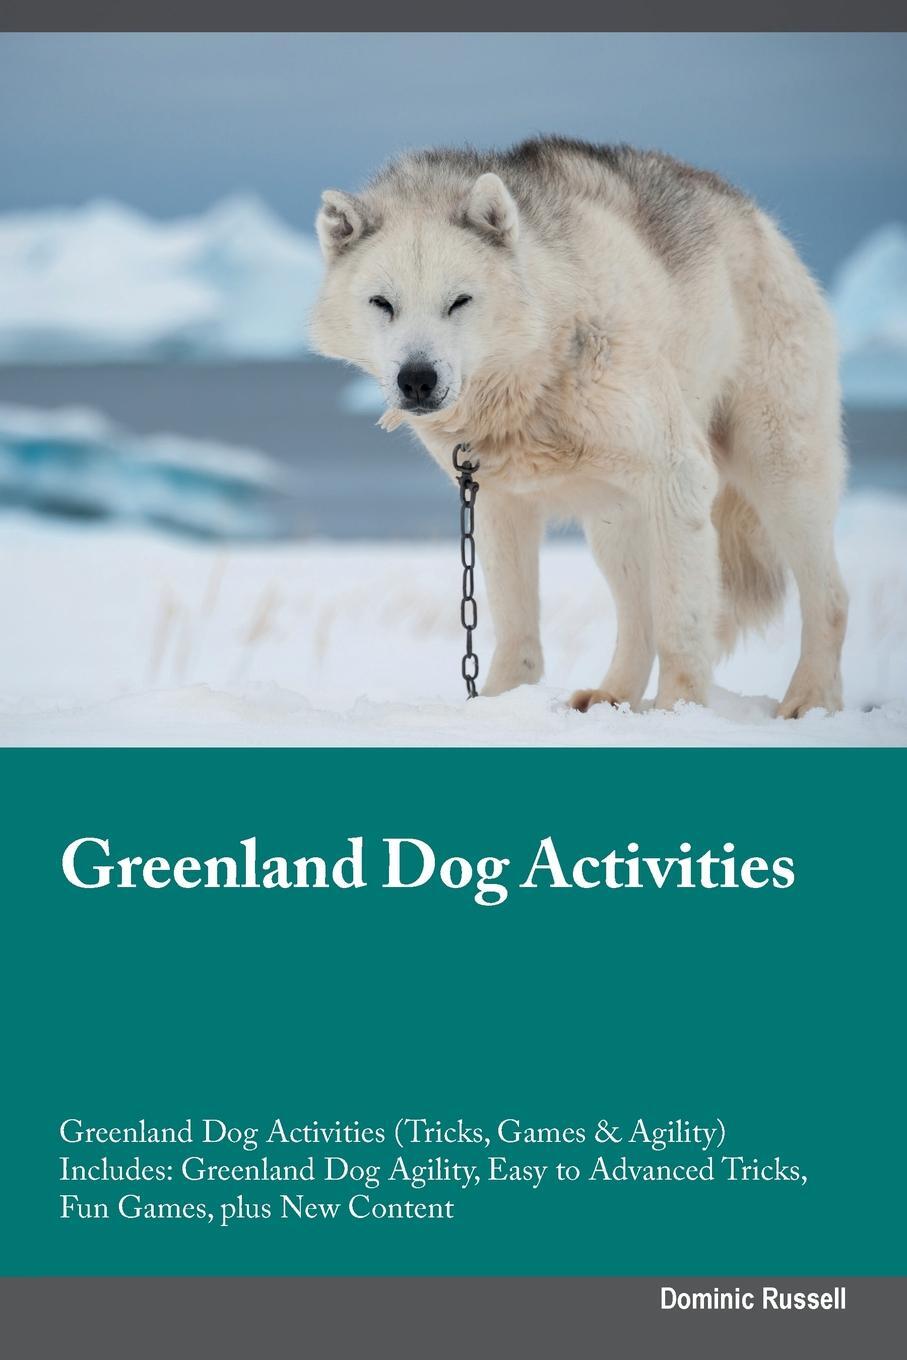 фото Greenland Dog Activities Greenland Dog Activities (Tricks, Games & Agility) Includes. Greenland Dog Agility, Easy to Advanced Tricks, Fun Games, plus New Content